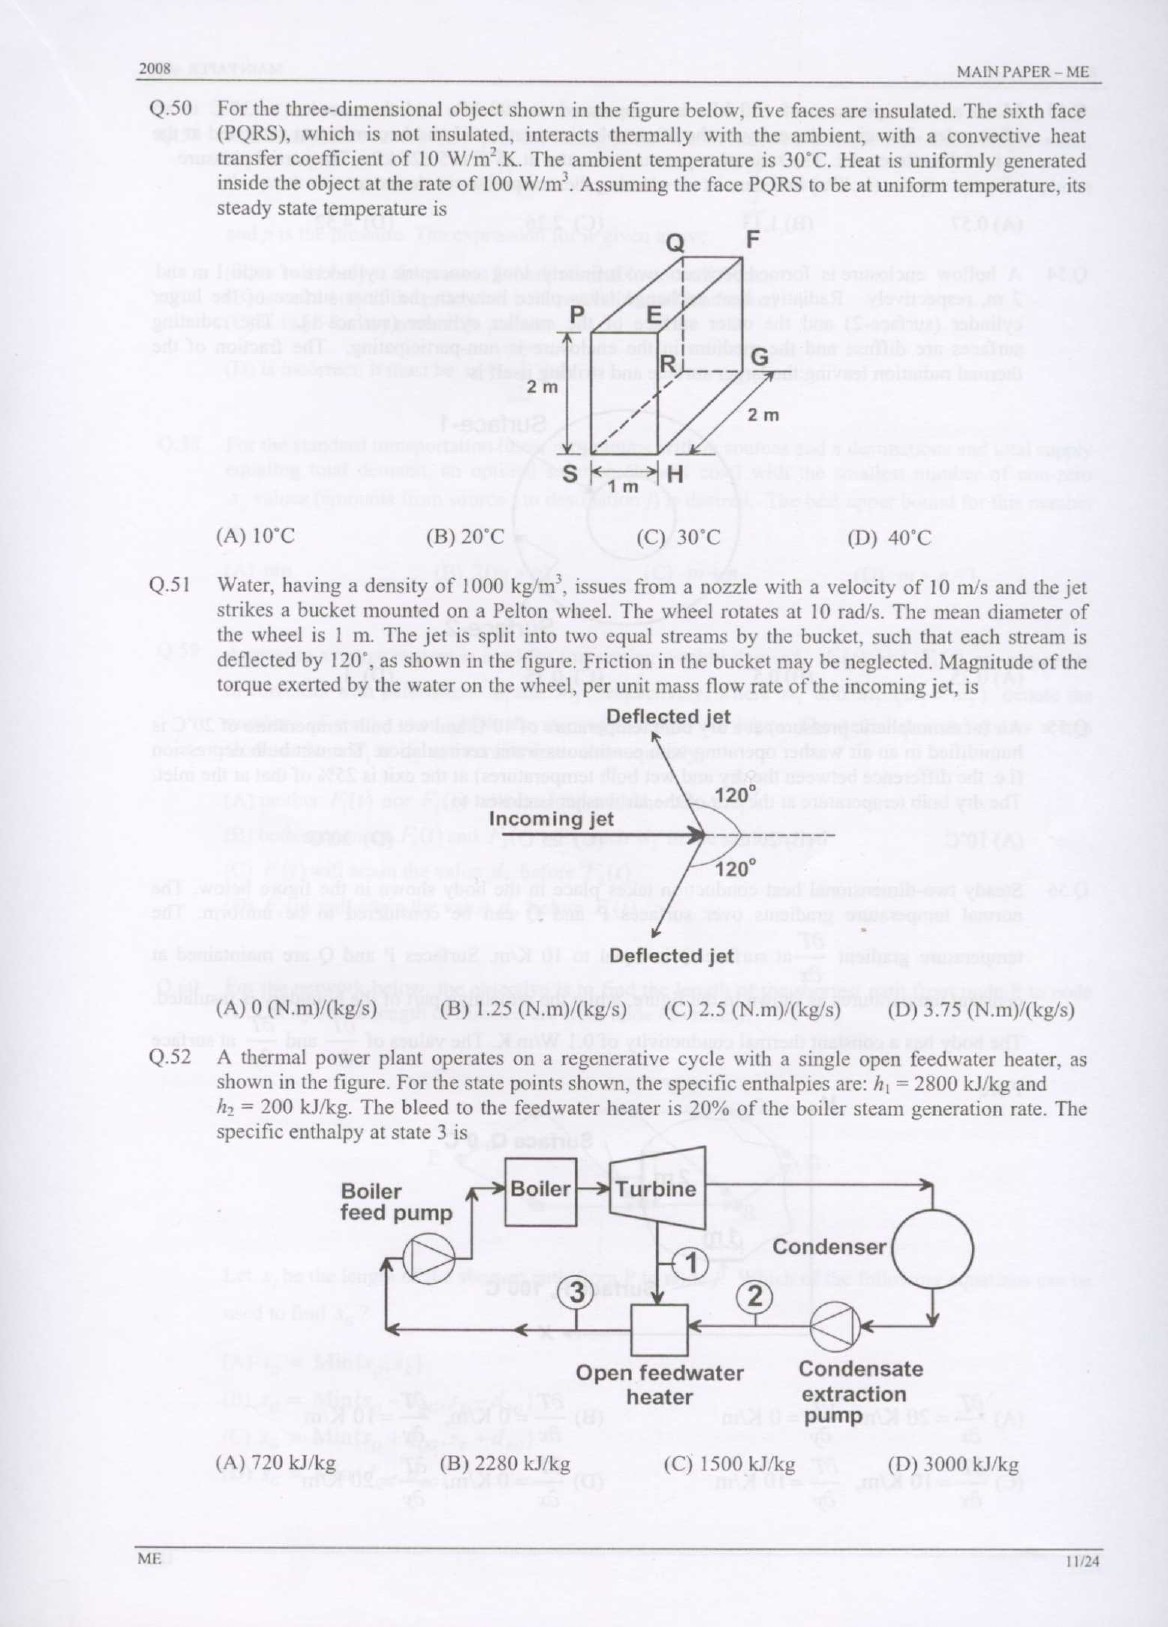 GATE Exam Question Paper 2008 Mechanical Engineering 11